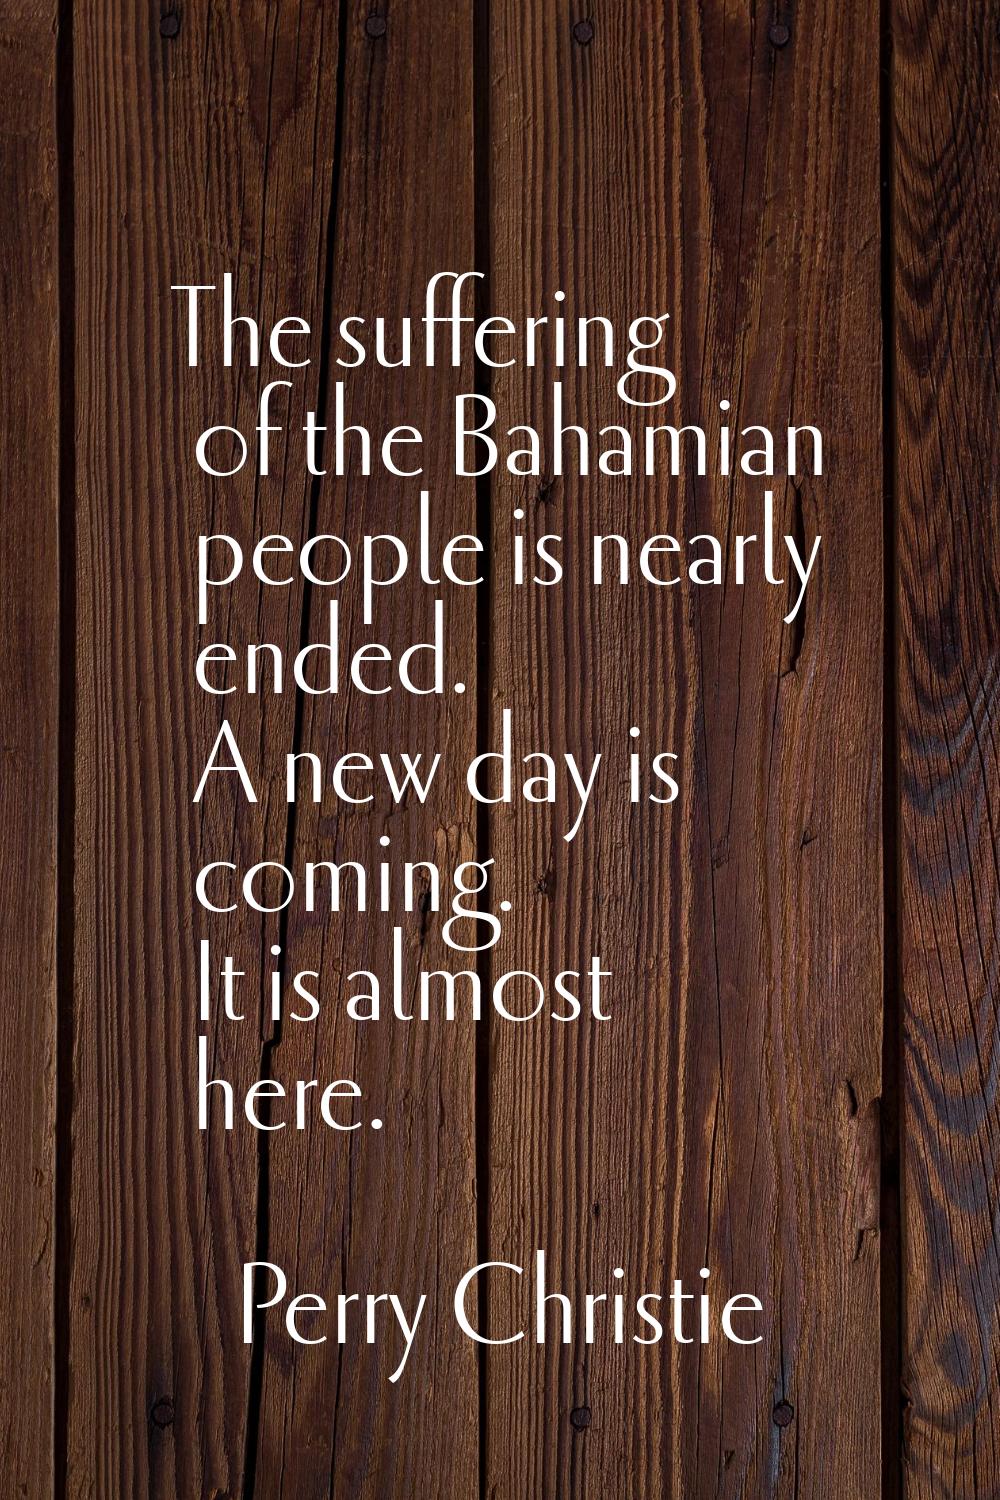 The suffering of the Bahamian people is nearly ended. A new day is coming. It is almost here.